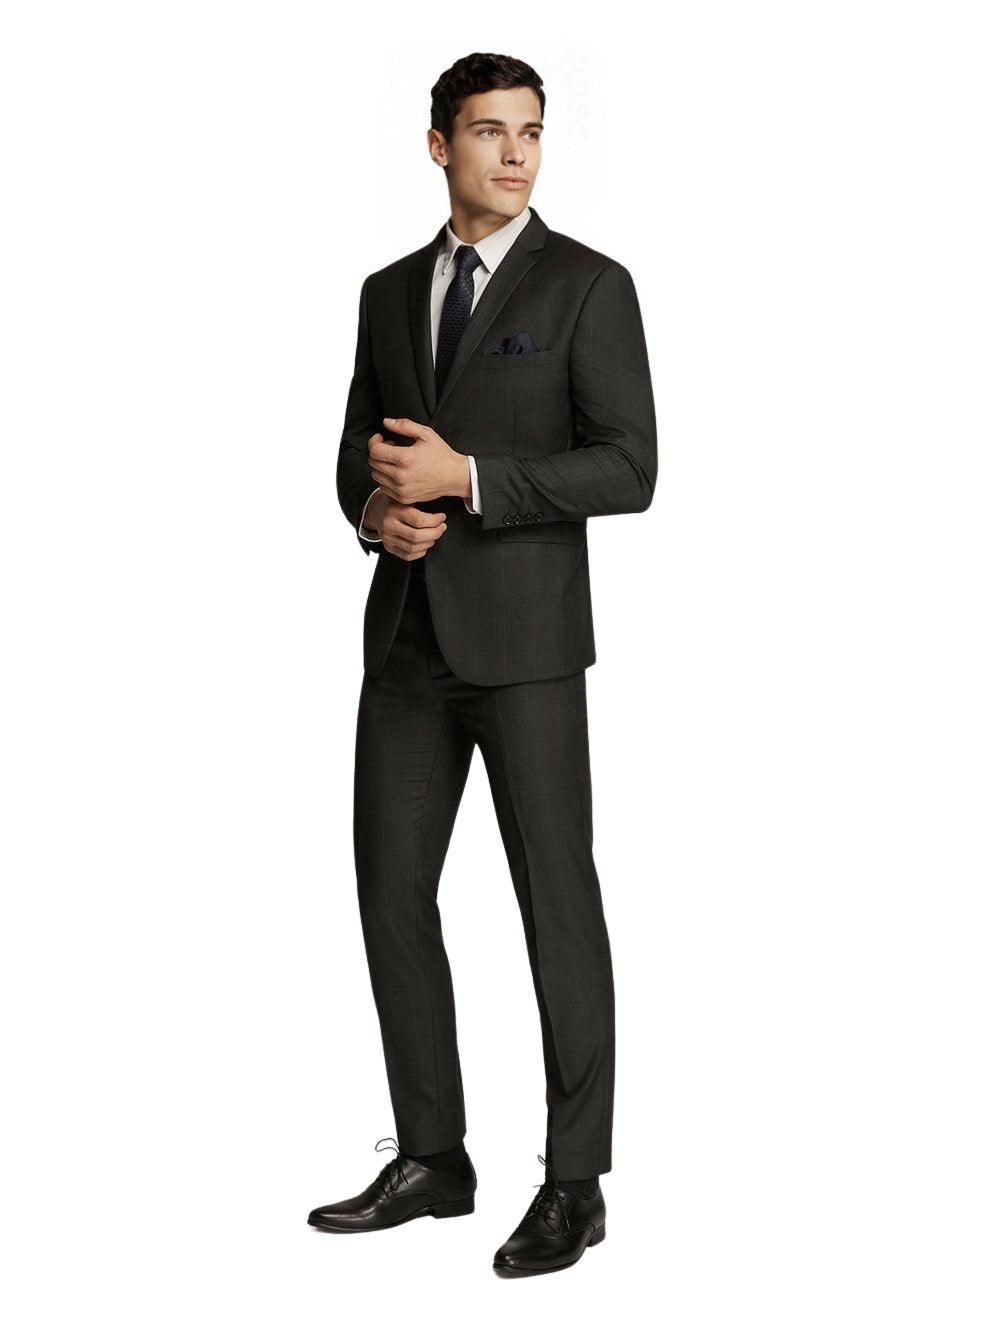 Men’s Charcoal Prince of Wales Check Slim Fit SUIT